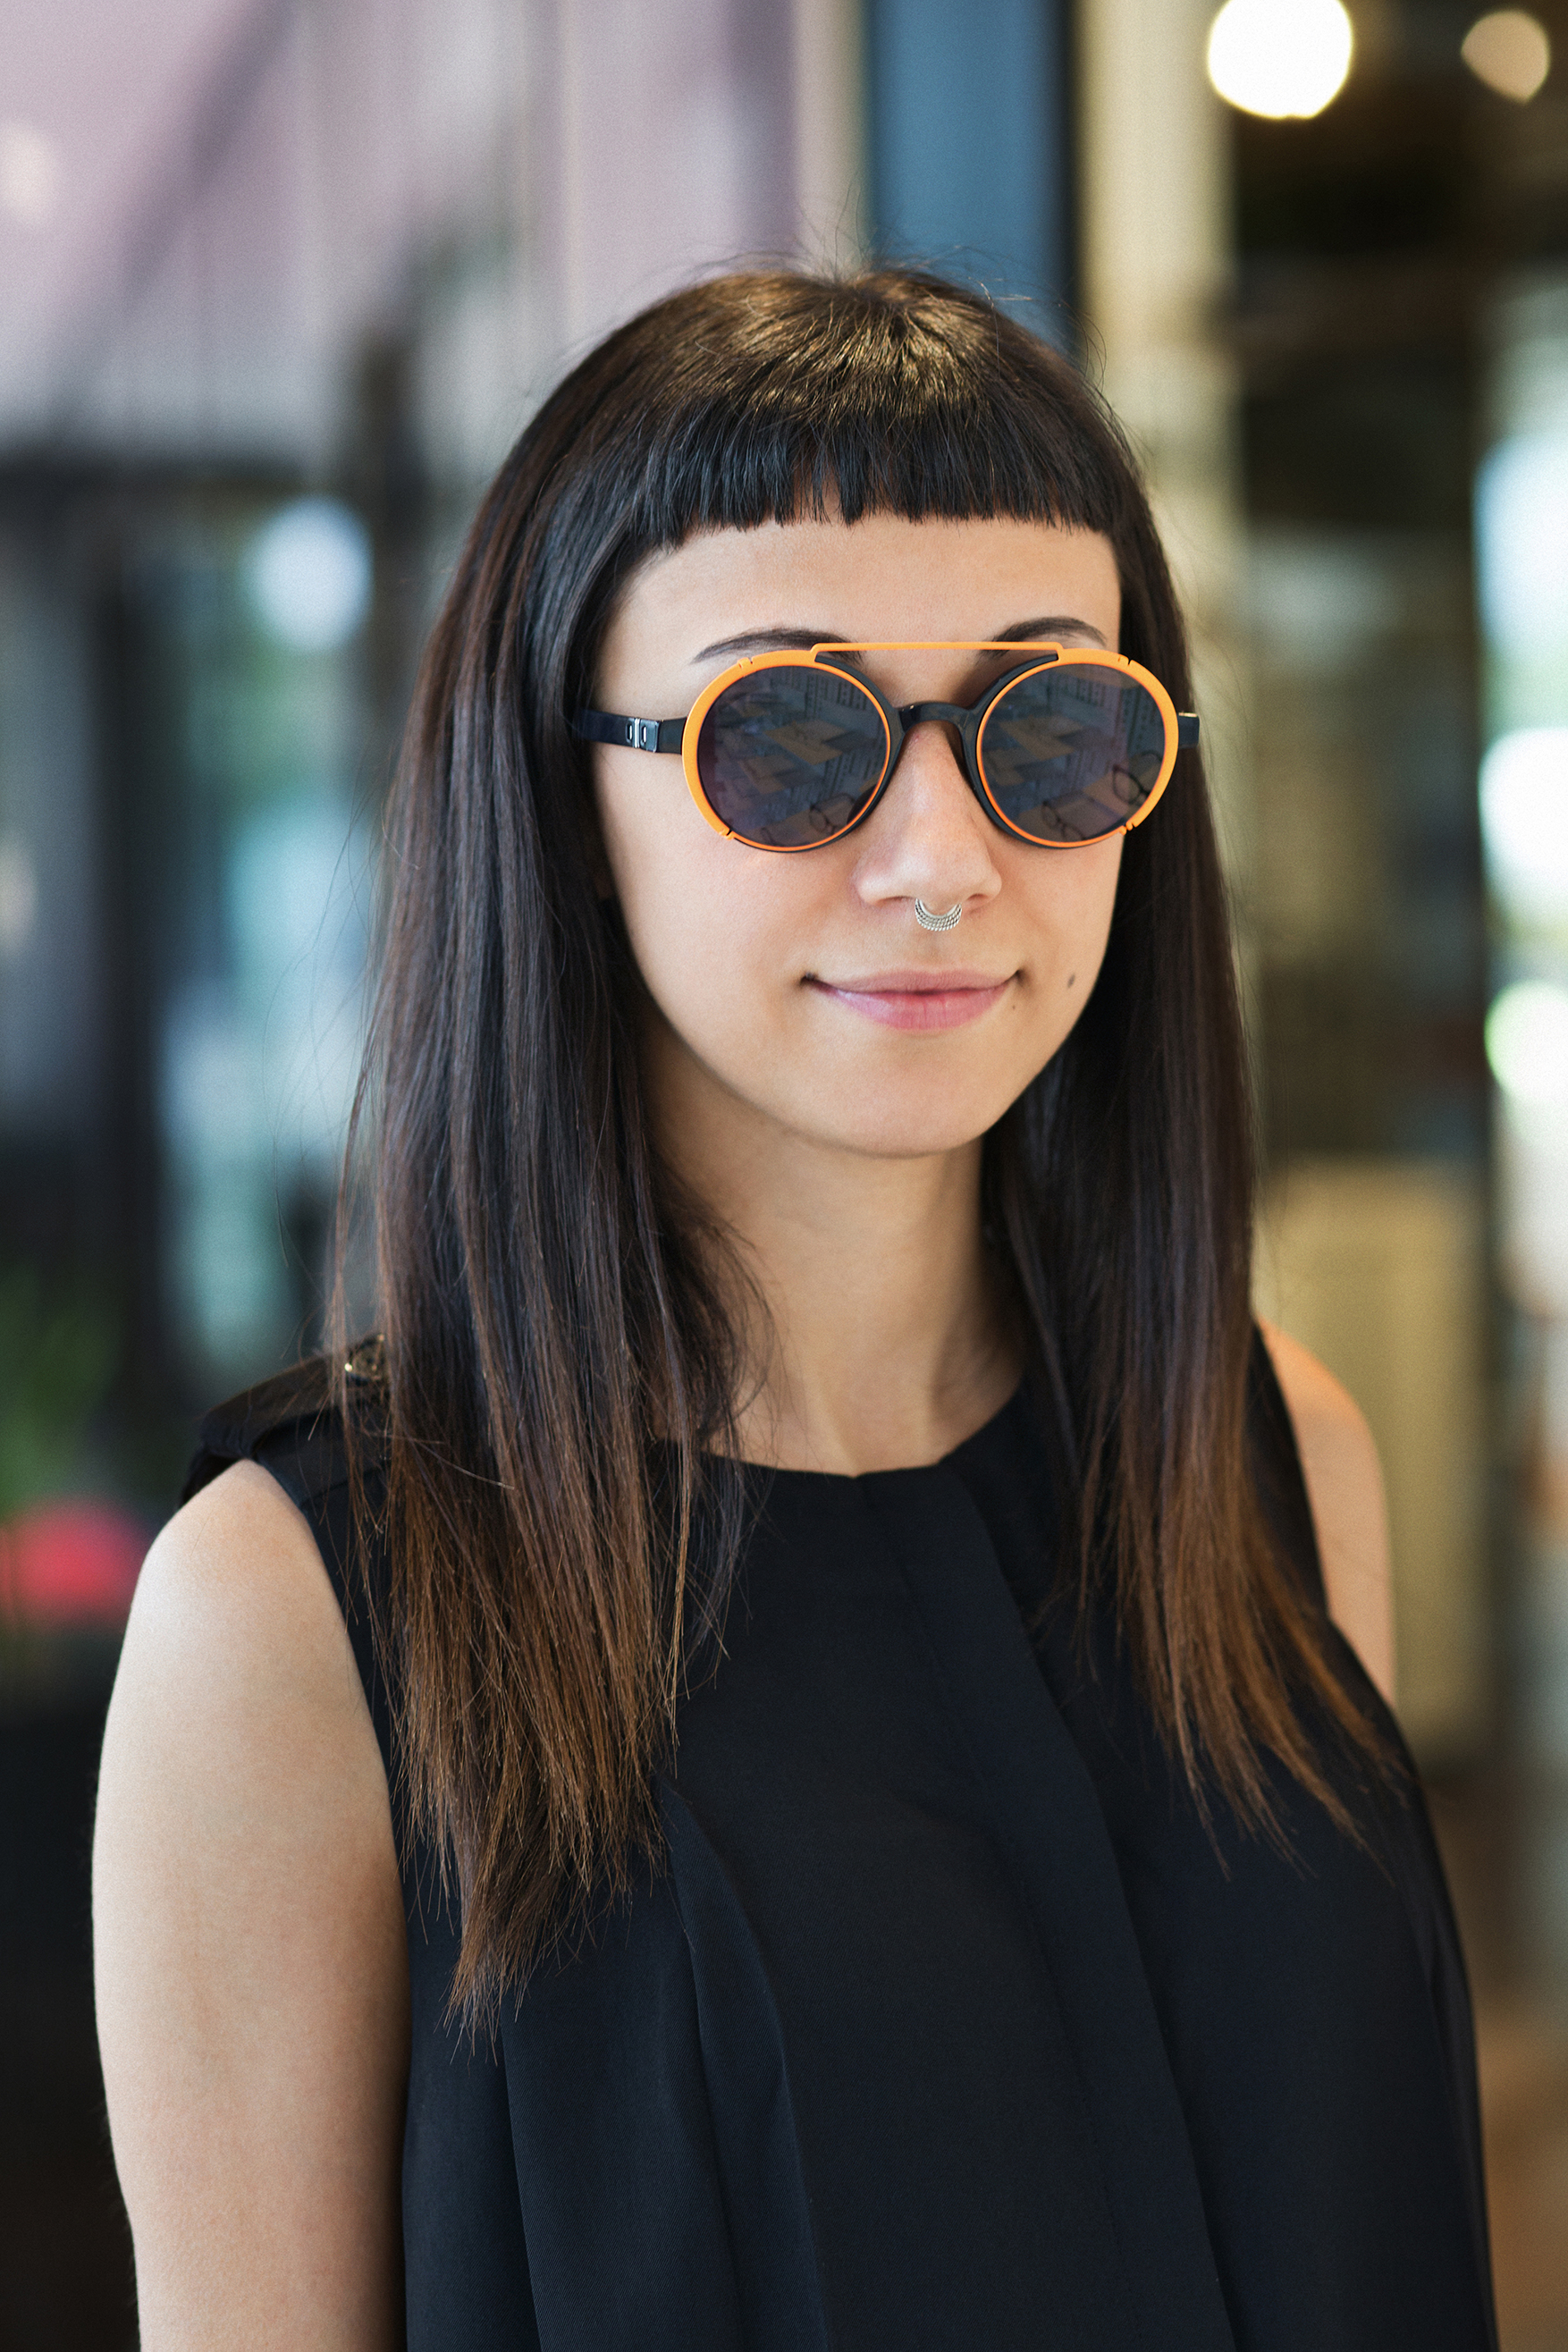 MYKITA - HOW TO PICK THE PERFECT PAIR